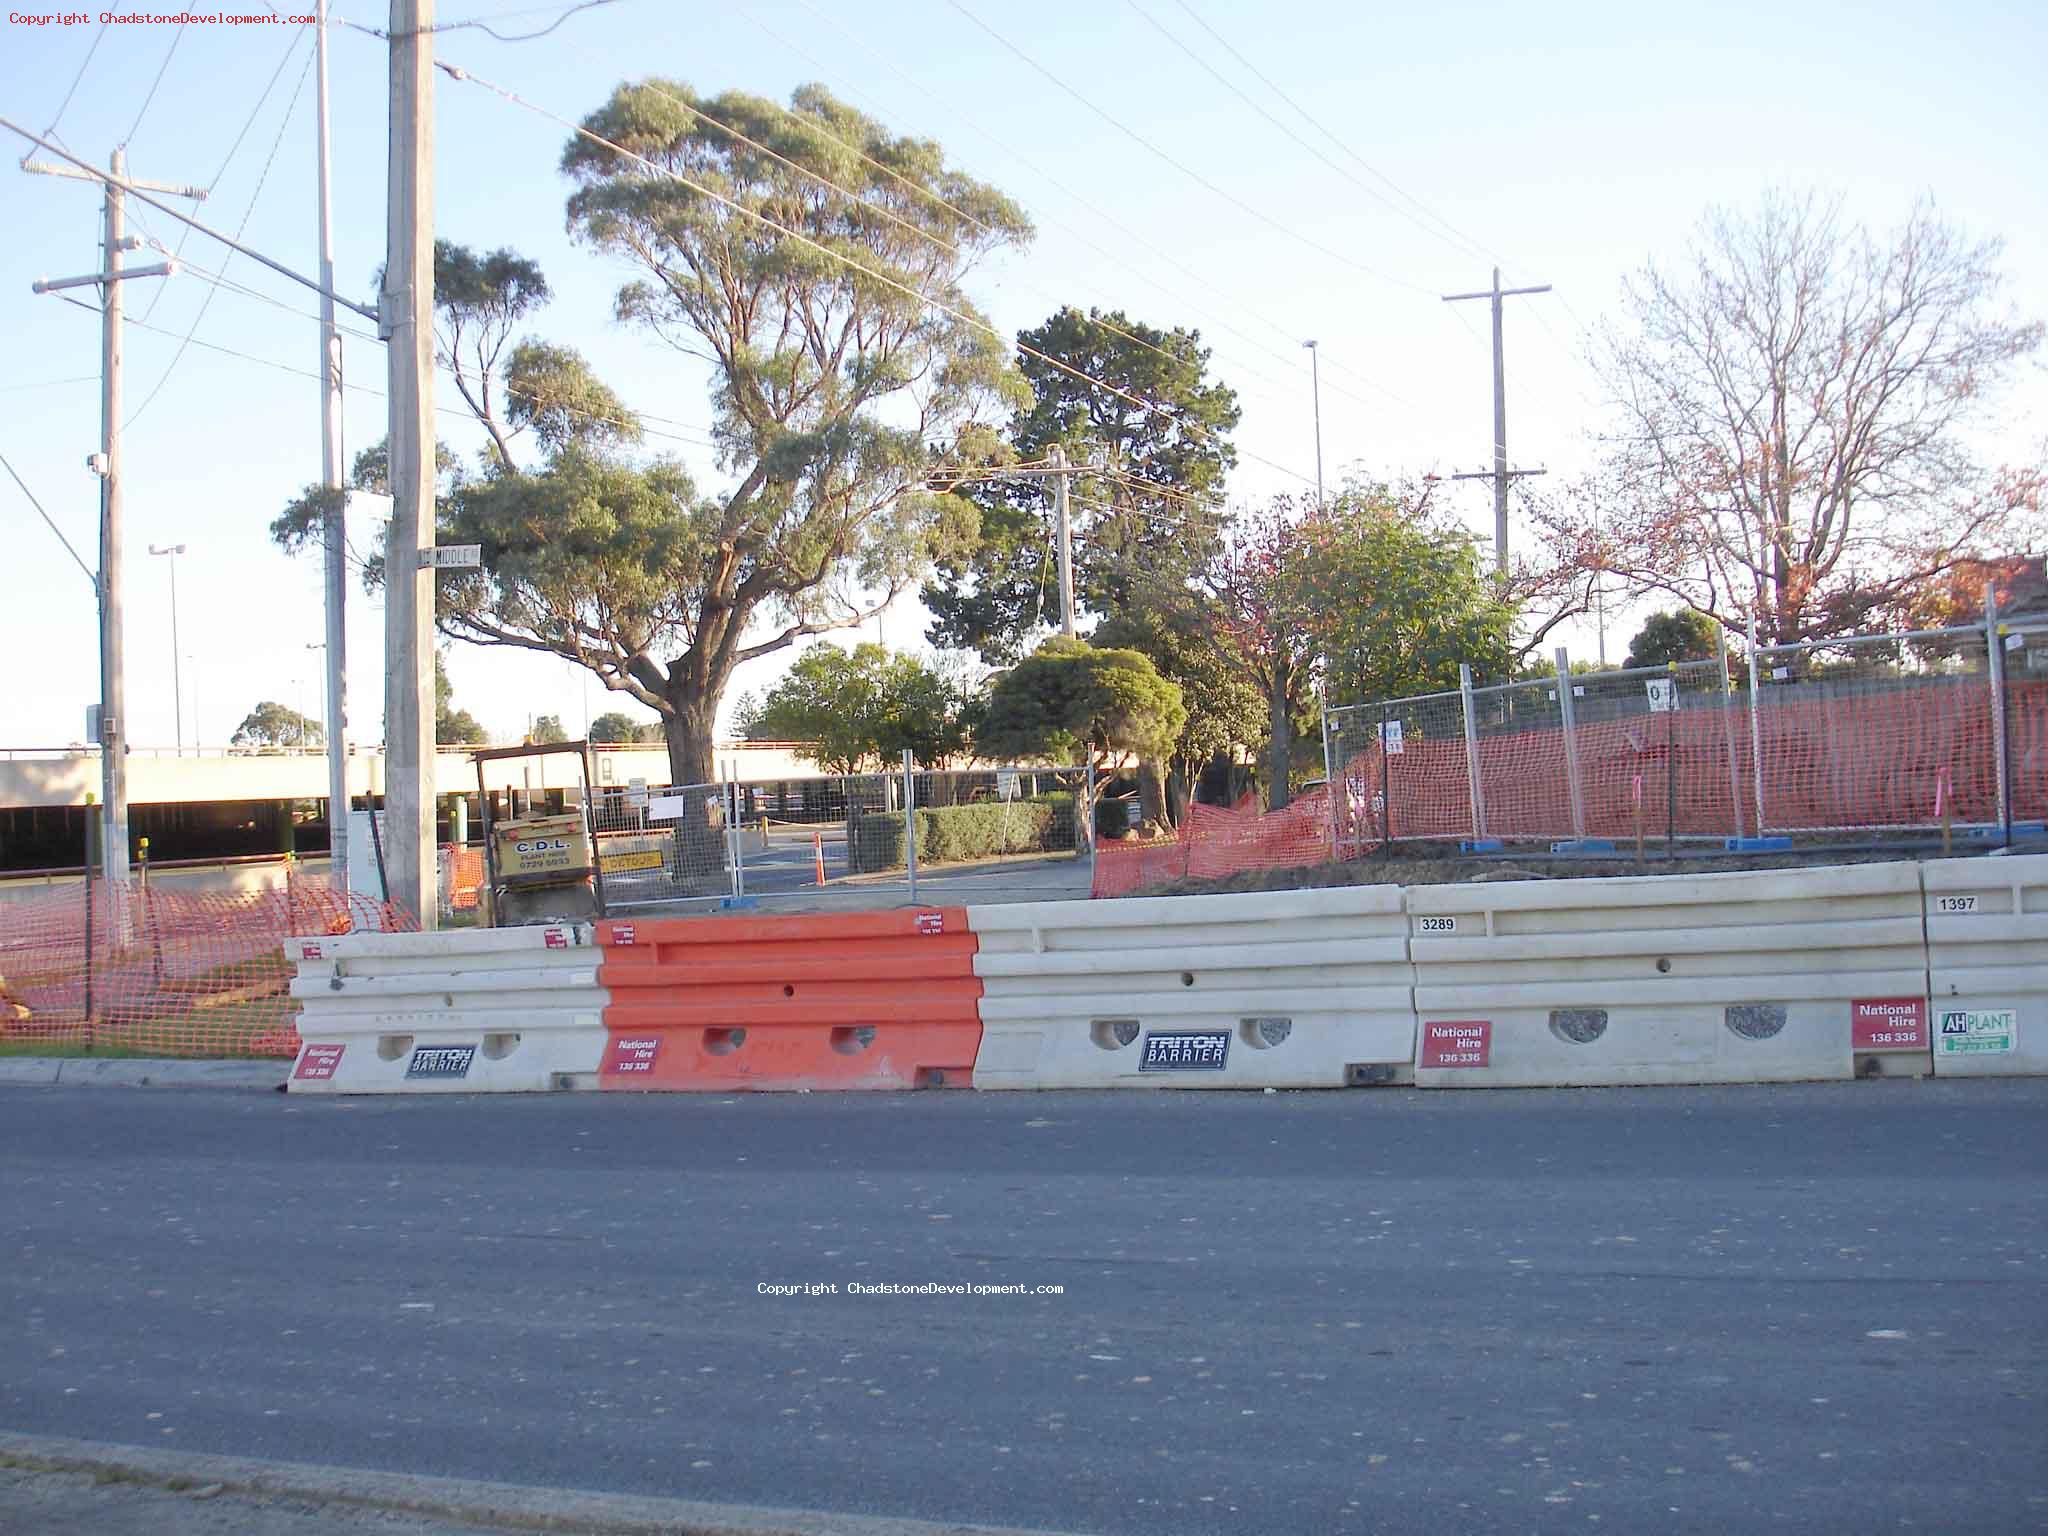 Roadworks on northern side of Capon St - Chadstone Development Discussions